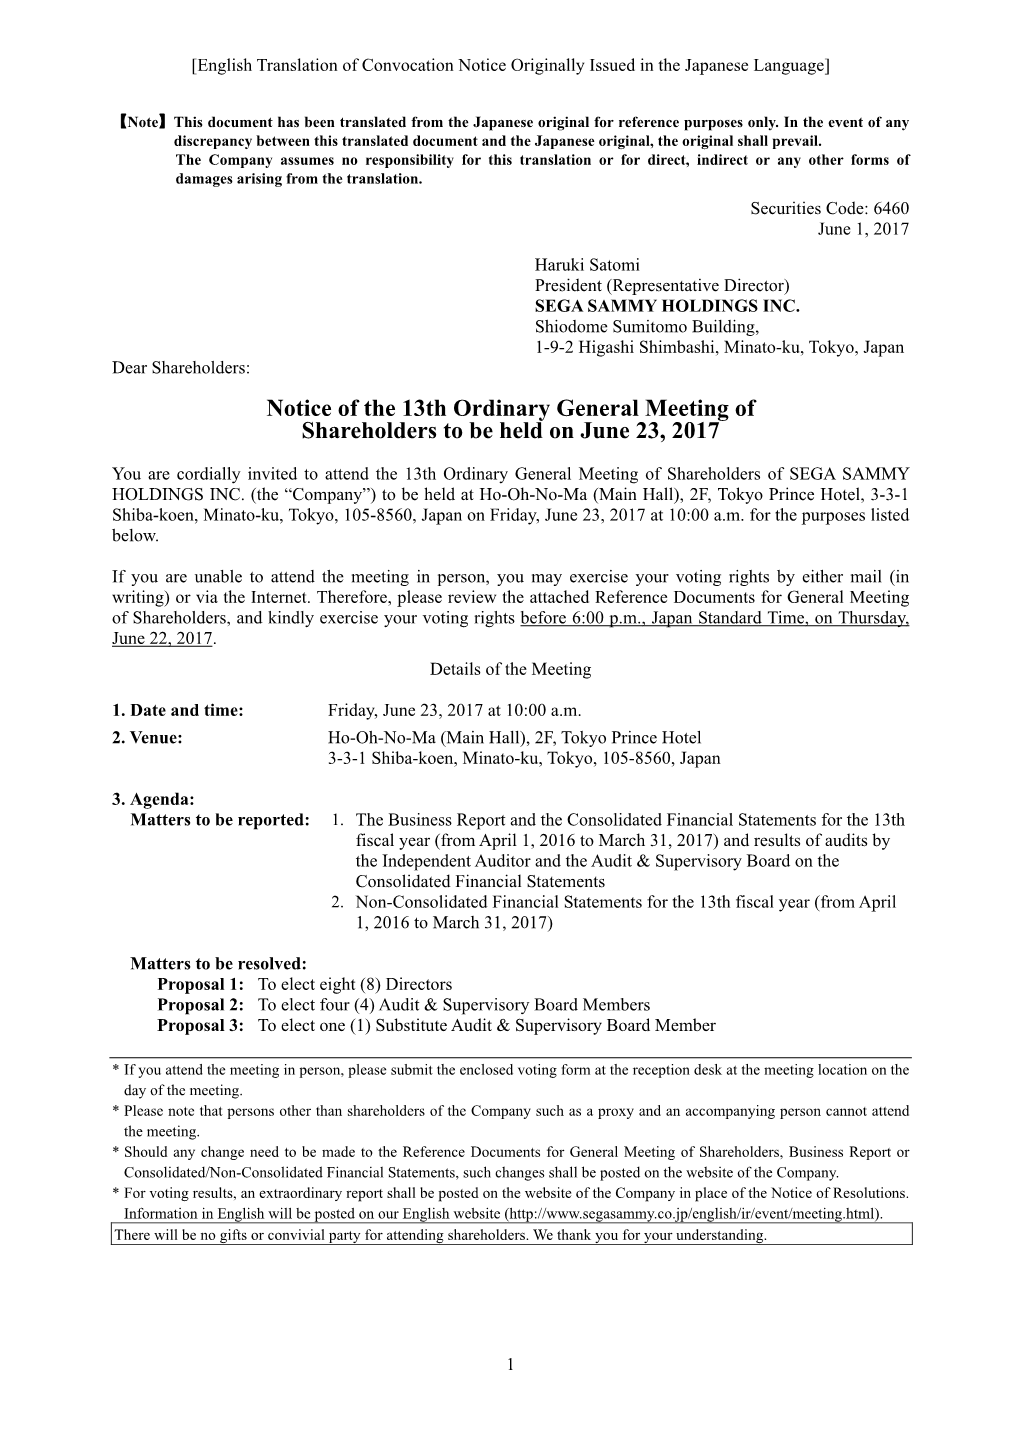 Notice of the 13Th Ordinary General Meeting of Shereholders（342KB）